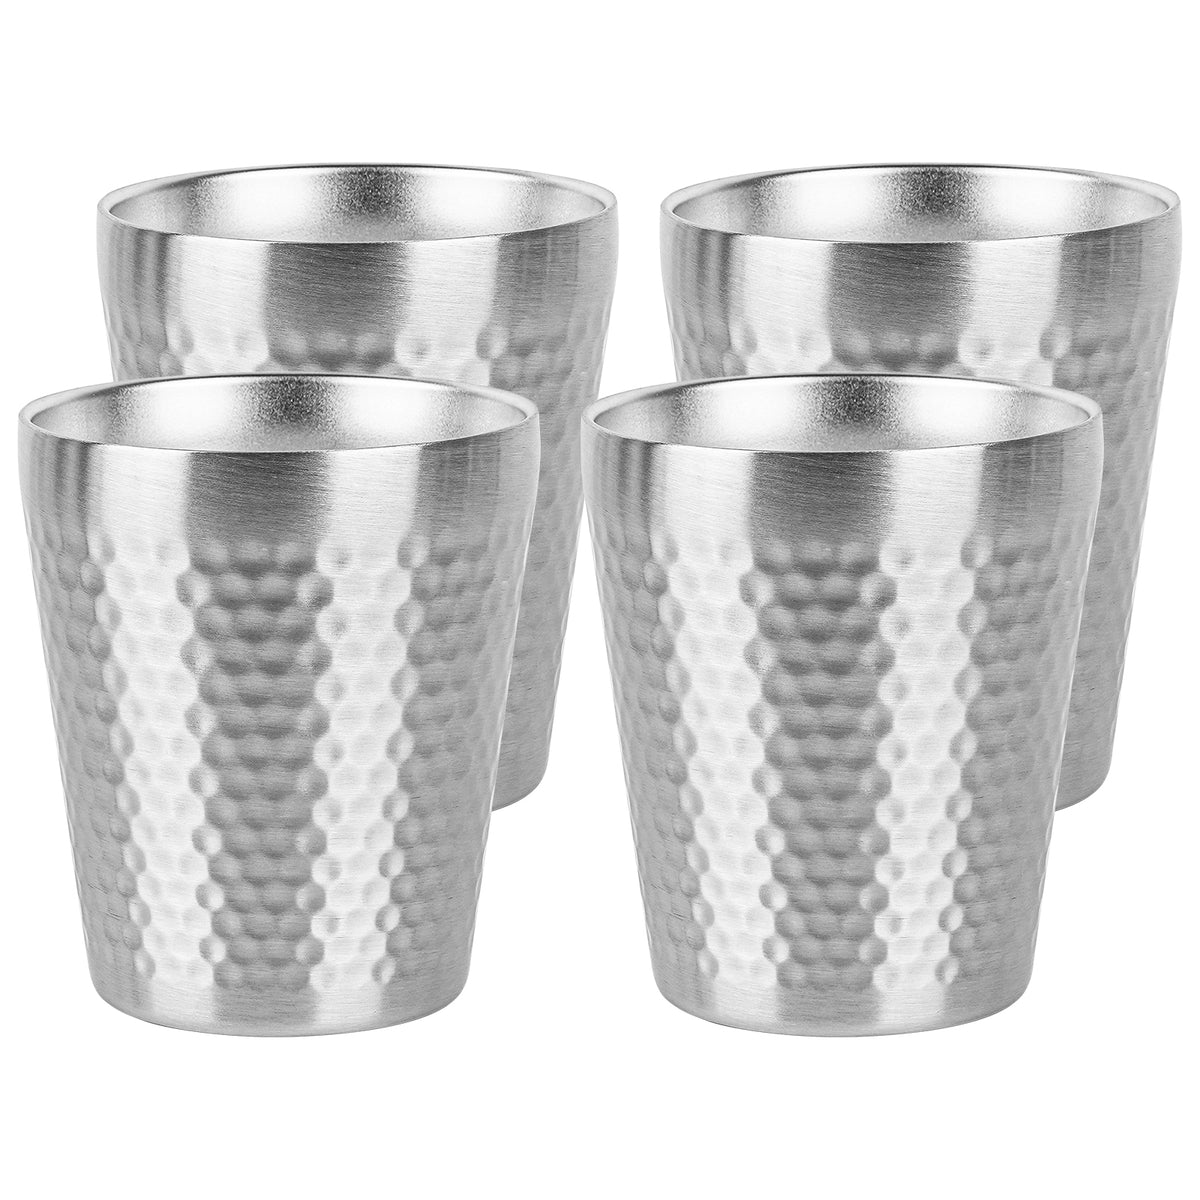 Adorila 4 Pack Stainless Steel Insulated Cup Double Wall, 10 oz Metal Stackable Water Tumblers, Reusable Drinking Glasses for Home Office Party Outdoor (Silver)